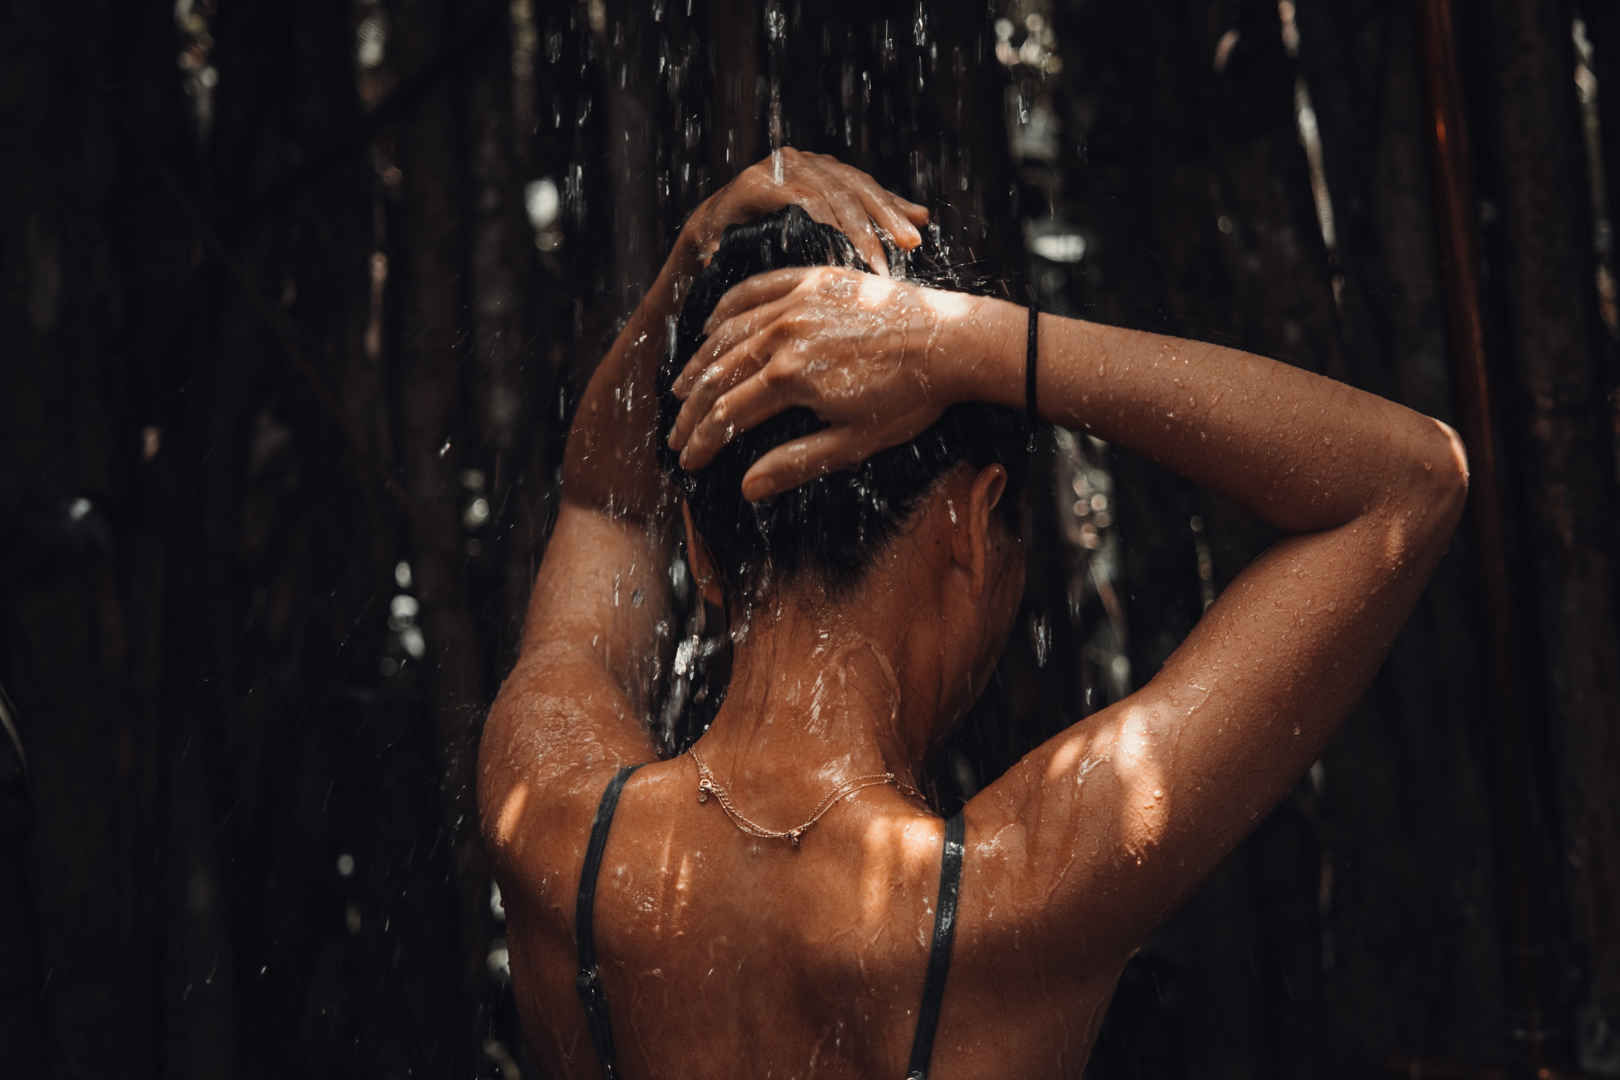 Woman washing hair in outdoor shower shot from behind